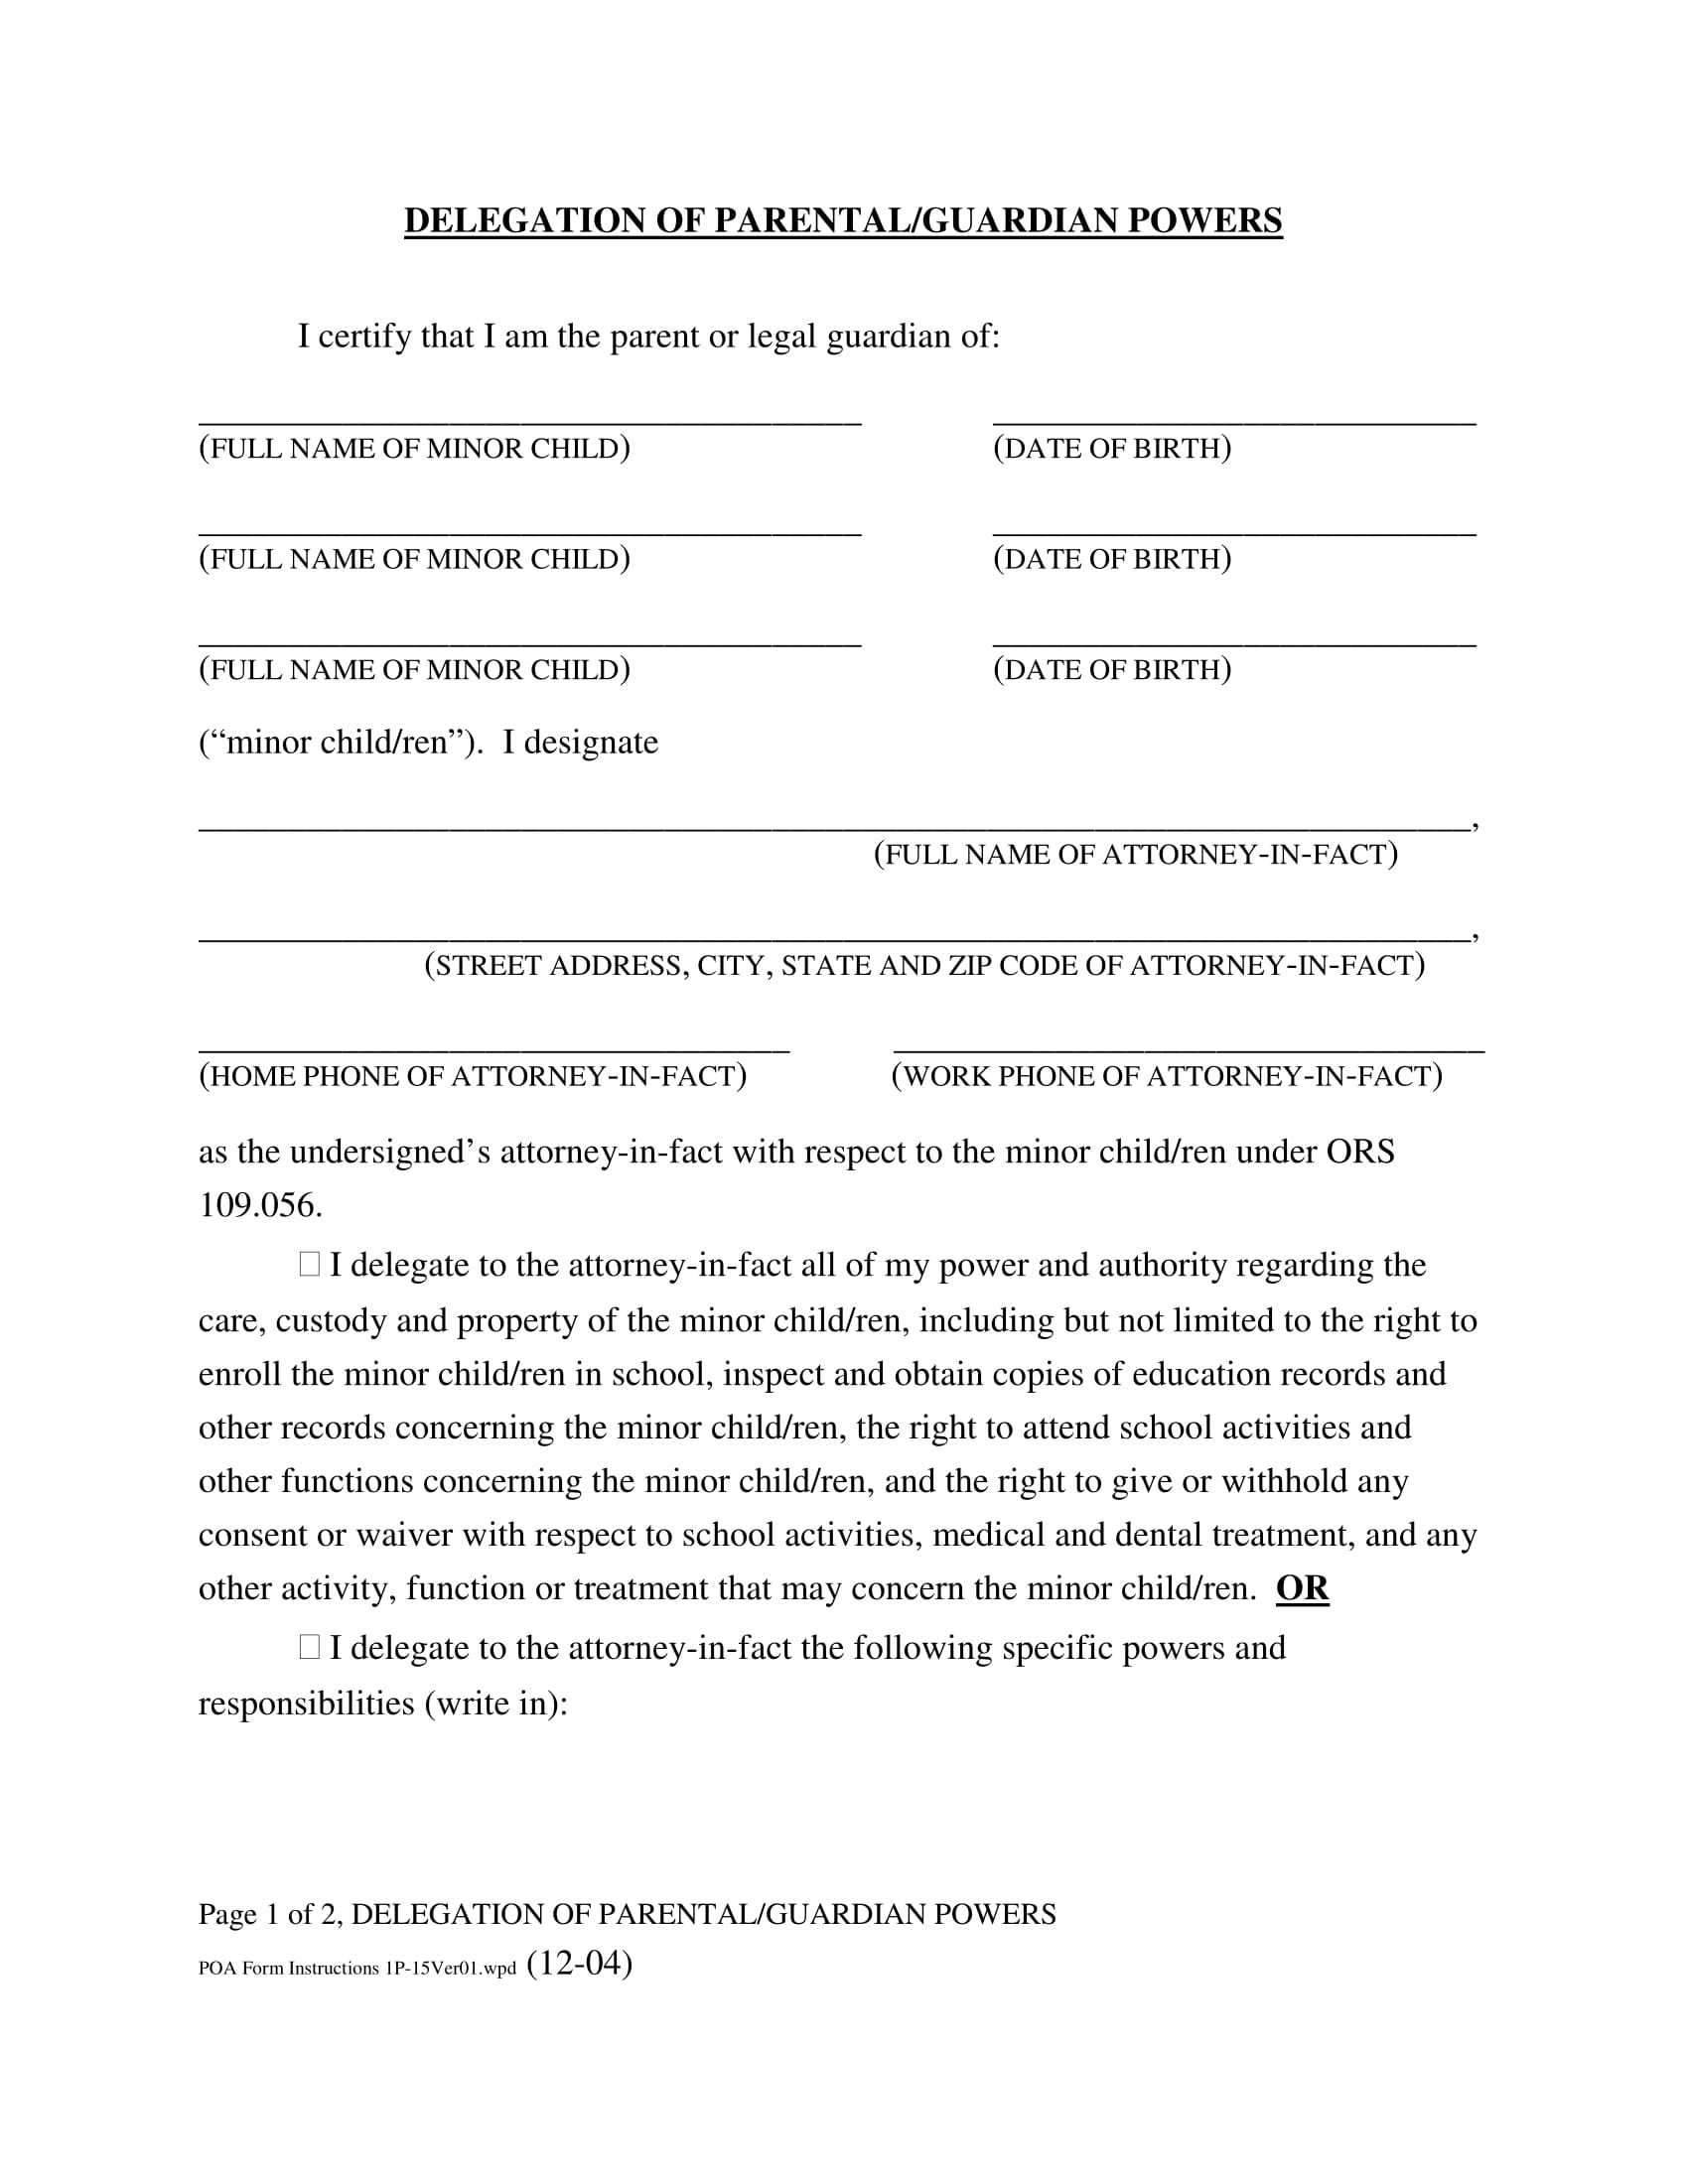 power of attorney guardianship form 4